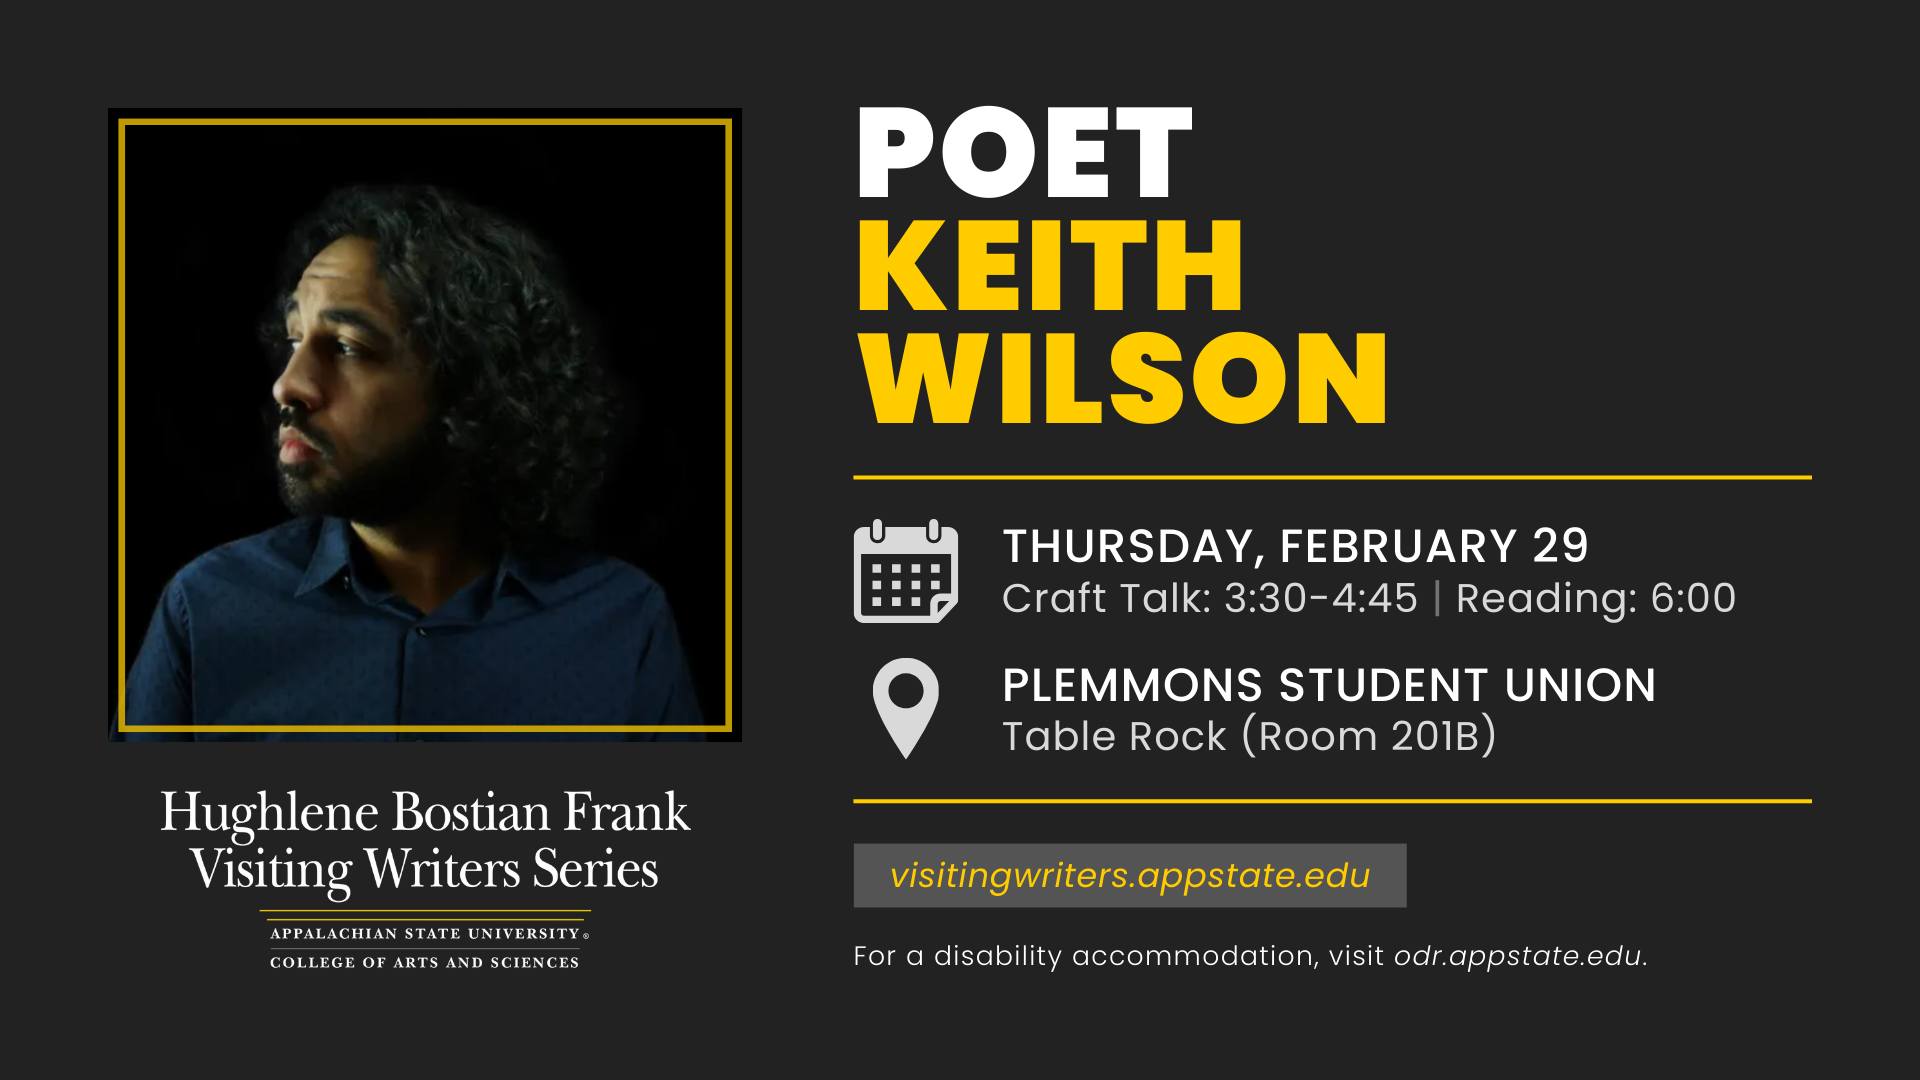 Visiting Writers Series with Keith S. Wilson promo.